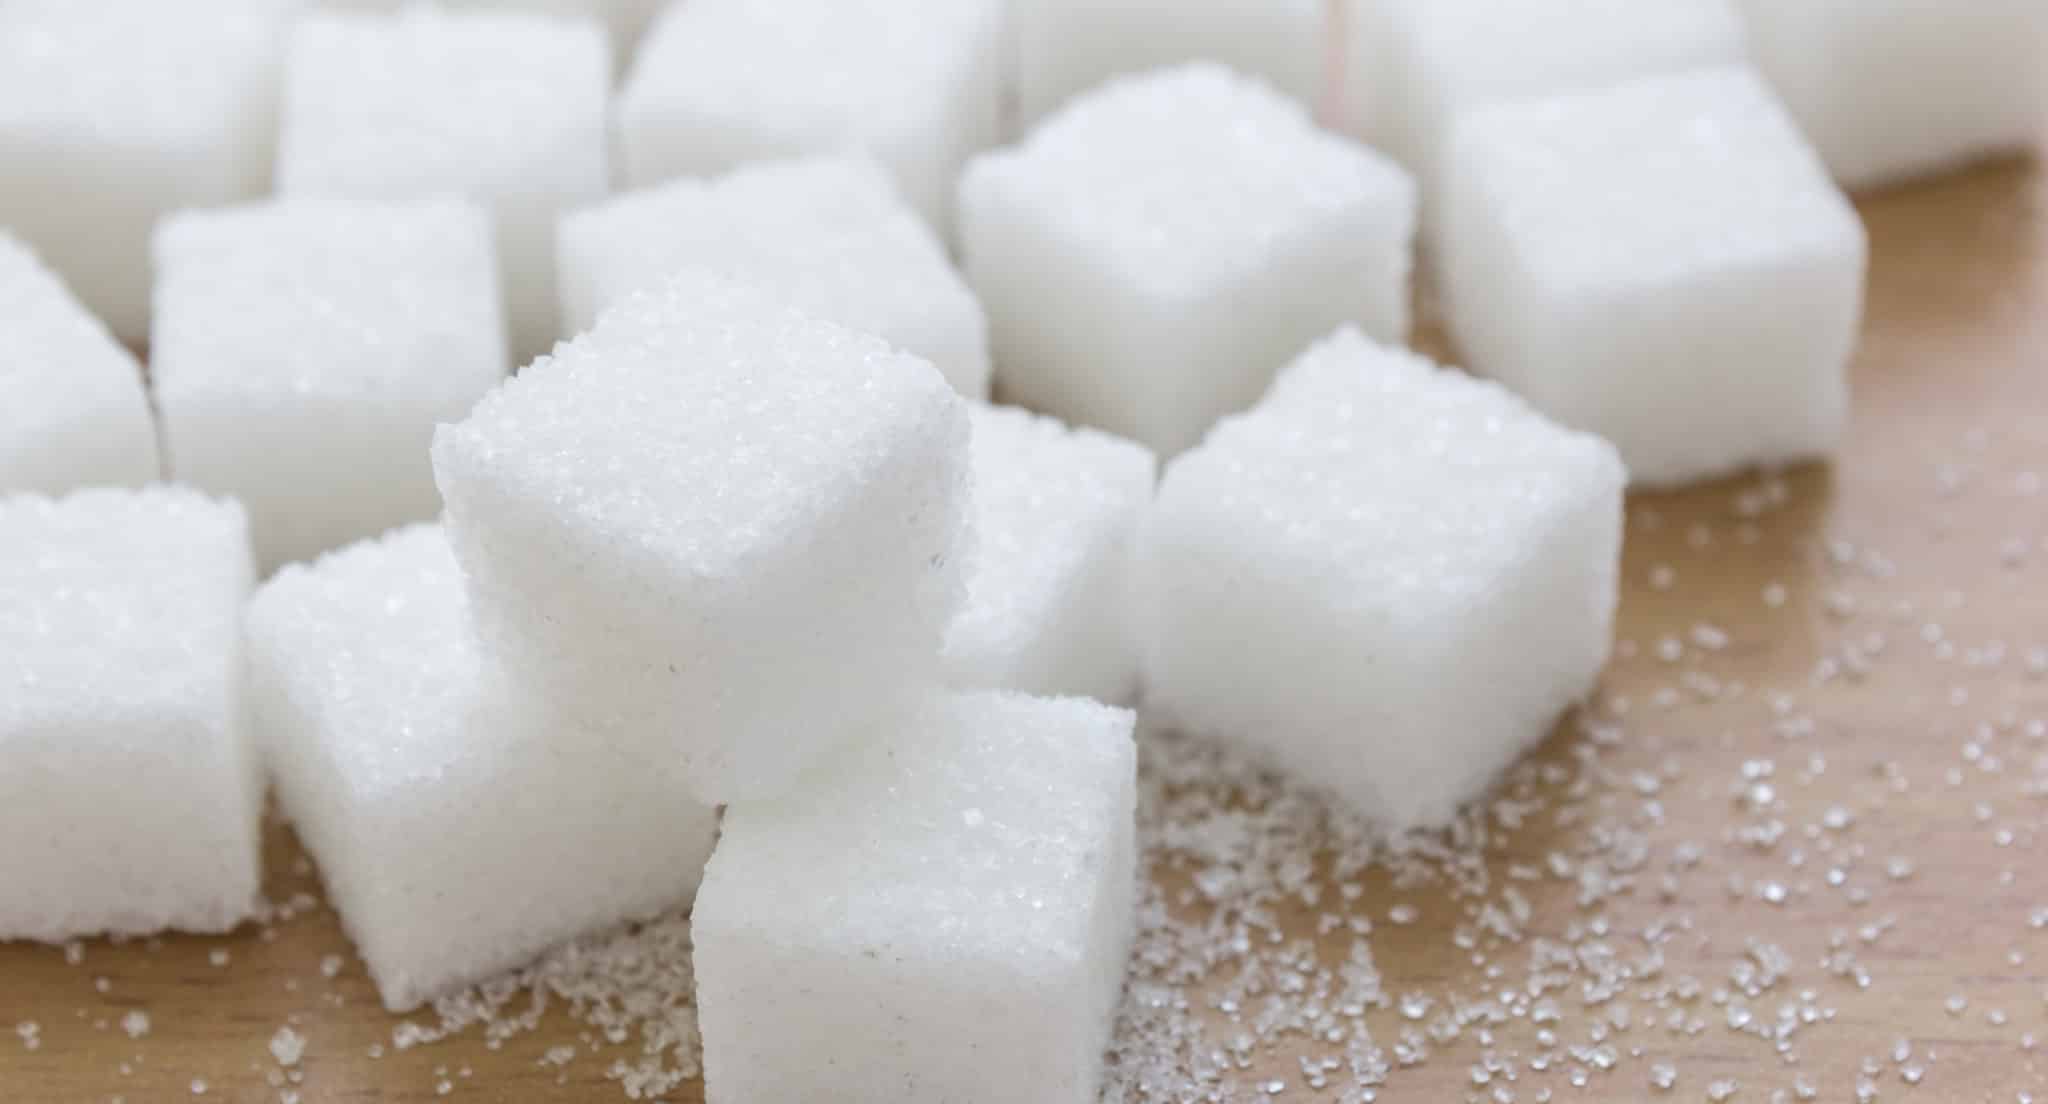 Sugar cubes on wood table discussing the effects of sugar on insulin and weight.